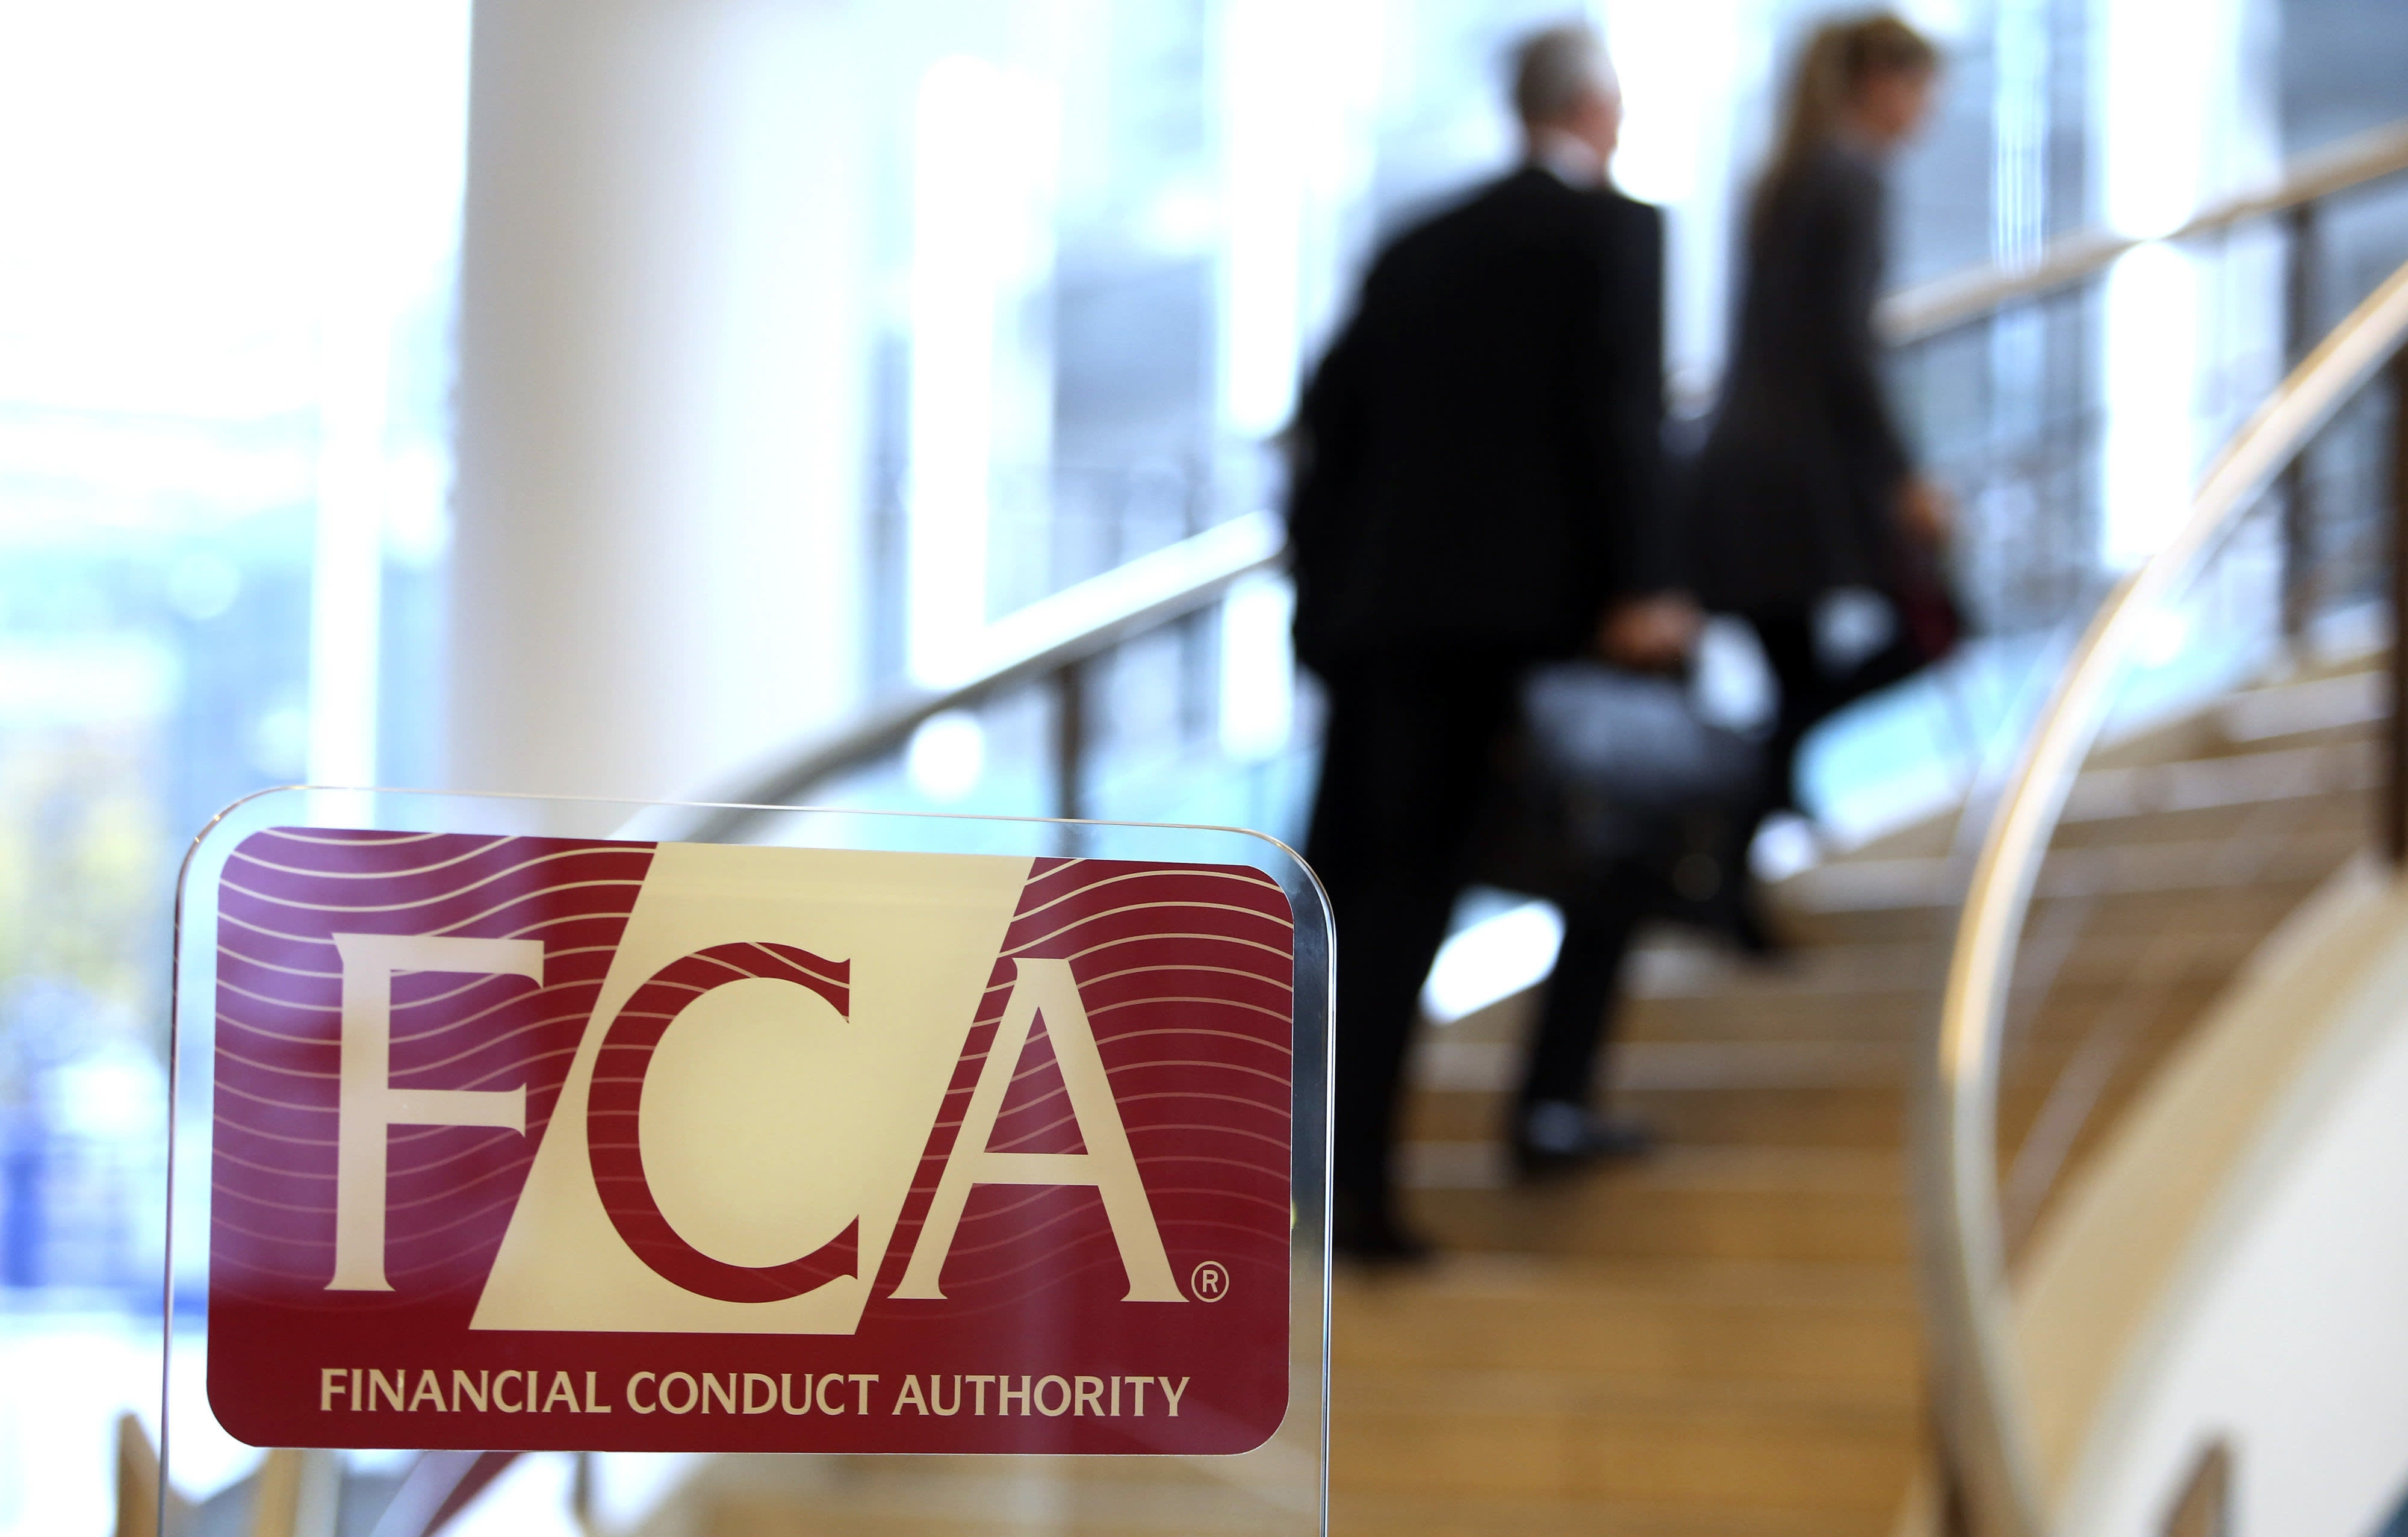 Concerns raised over changes to FCA decision making